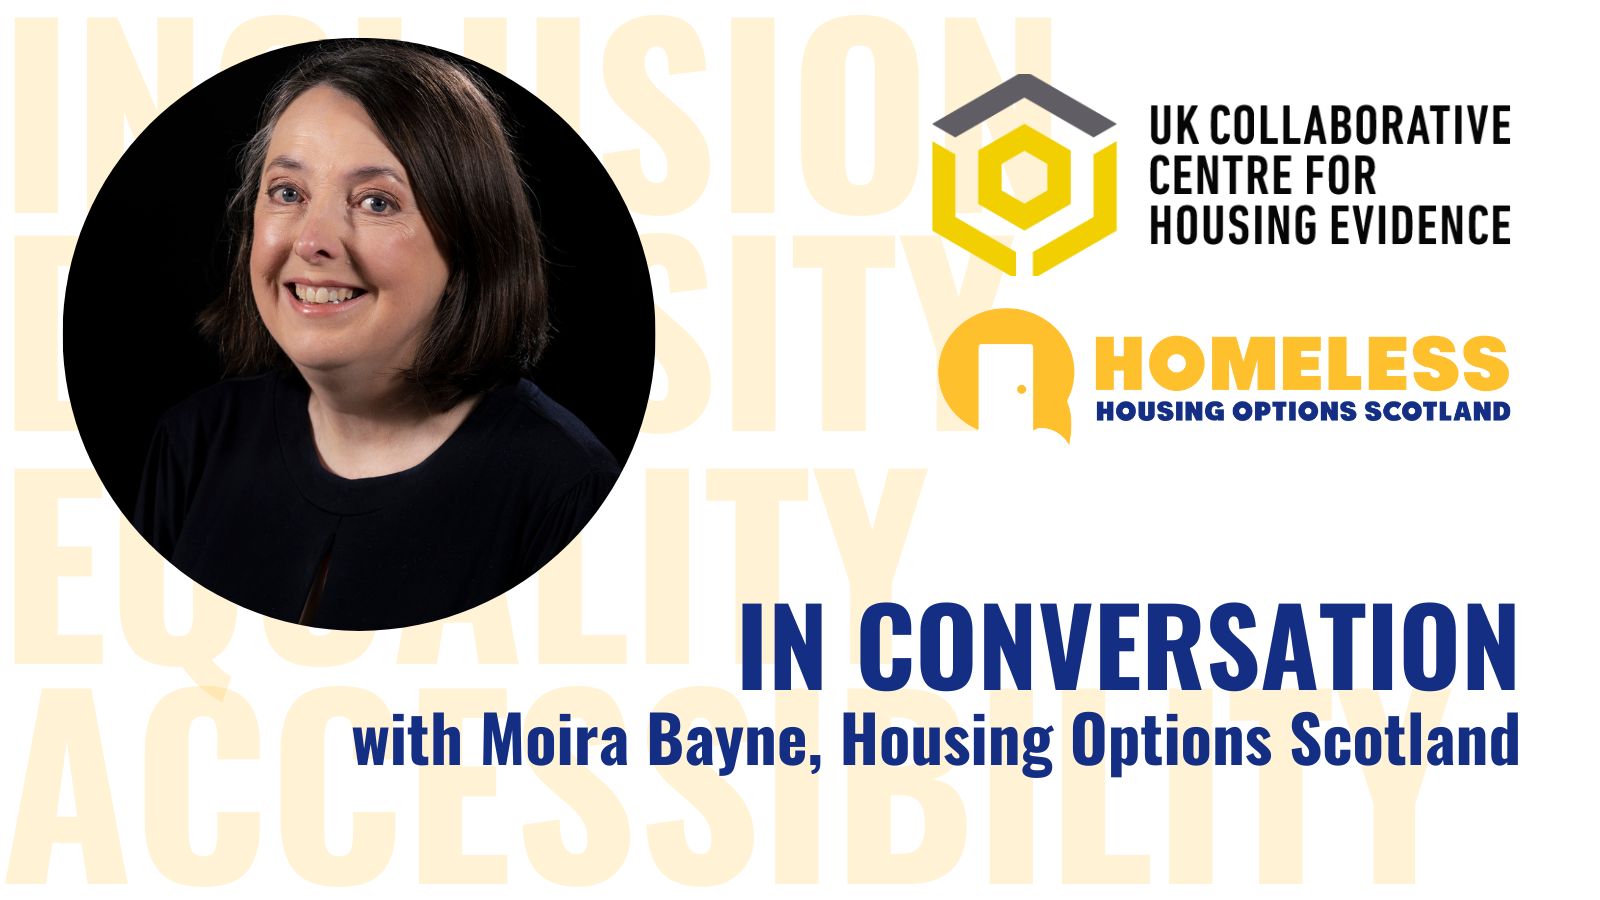 Housing Options Scotland and CaCHE publish podcast conversation with Moira Bayne